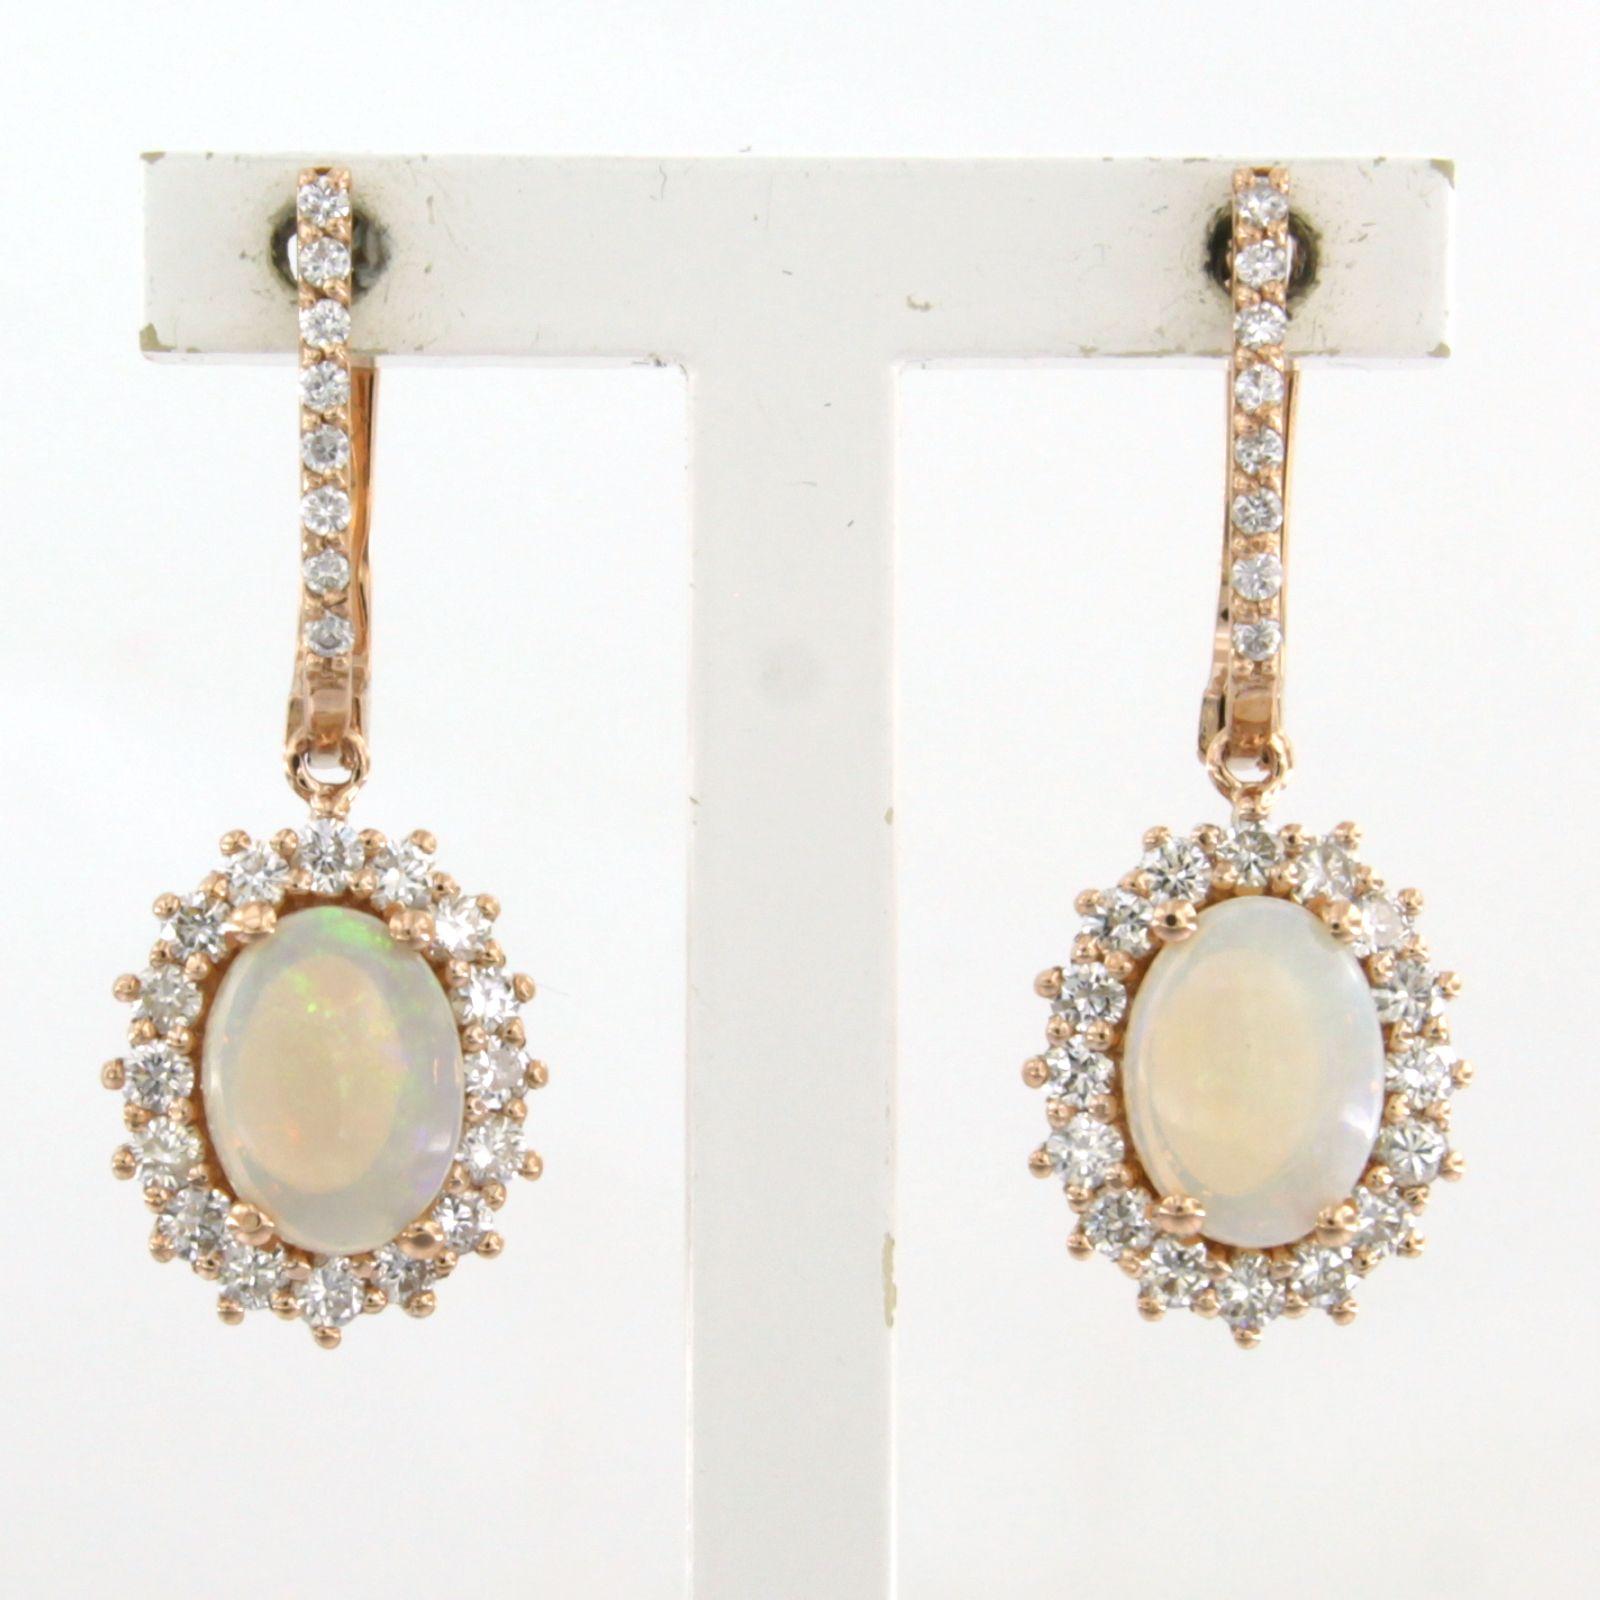 18k rose gold entourage earrings set with opal and brilliant cut diamonds up to 0.75ct - F/G – VS/SI

Detailed description:

the size of the earring is 2.7 cm long by 1.0 cm wide

Total weight 5.6 grams

set with

- 2 x 7.0 mm x 5.0 mm oval cabachon